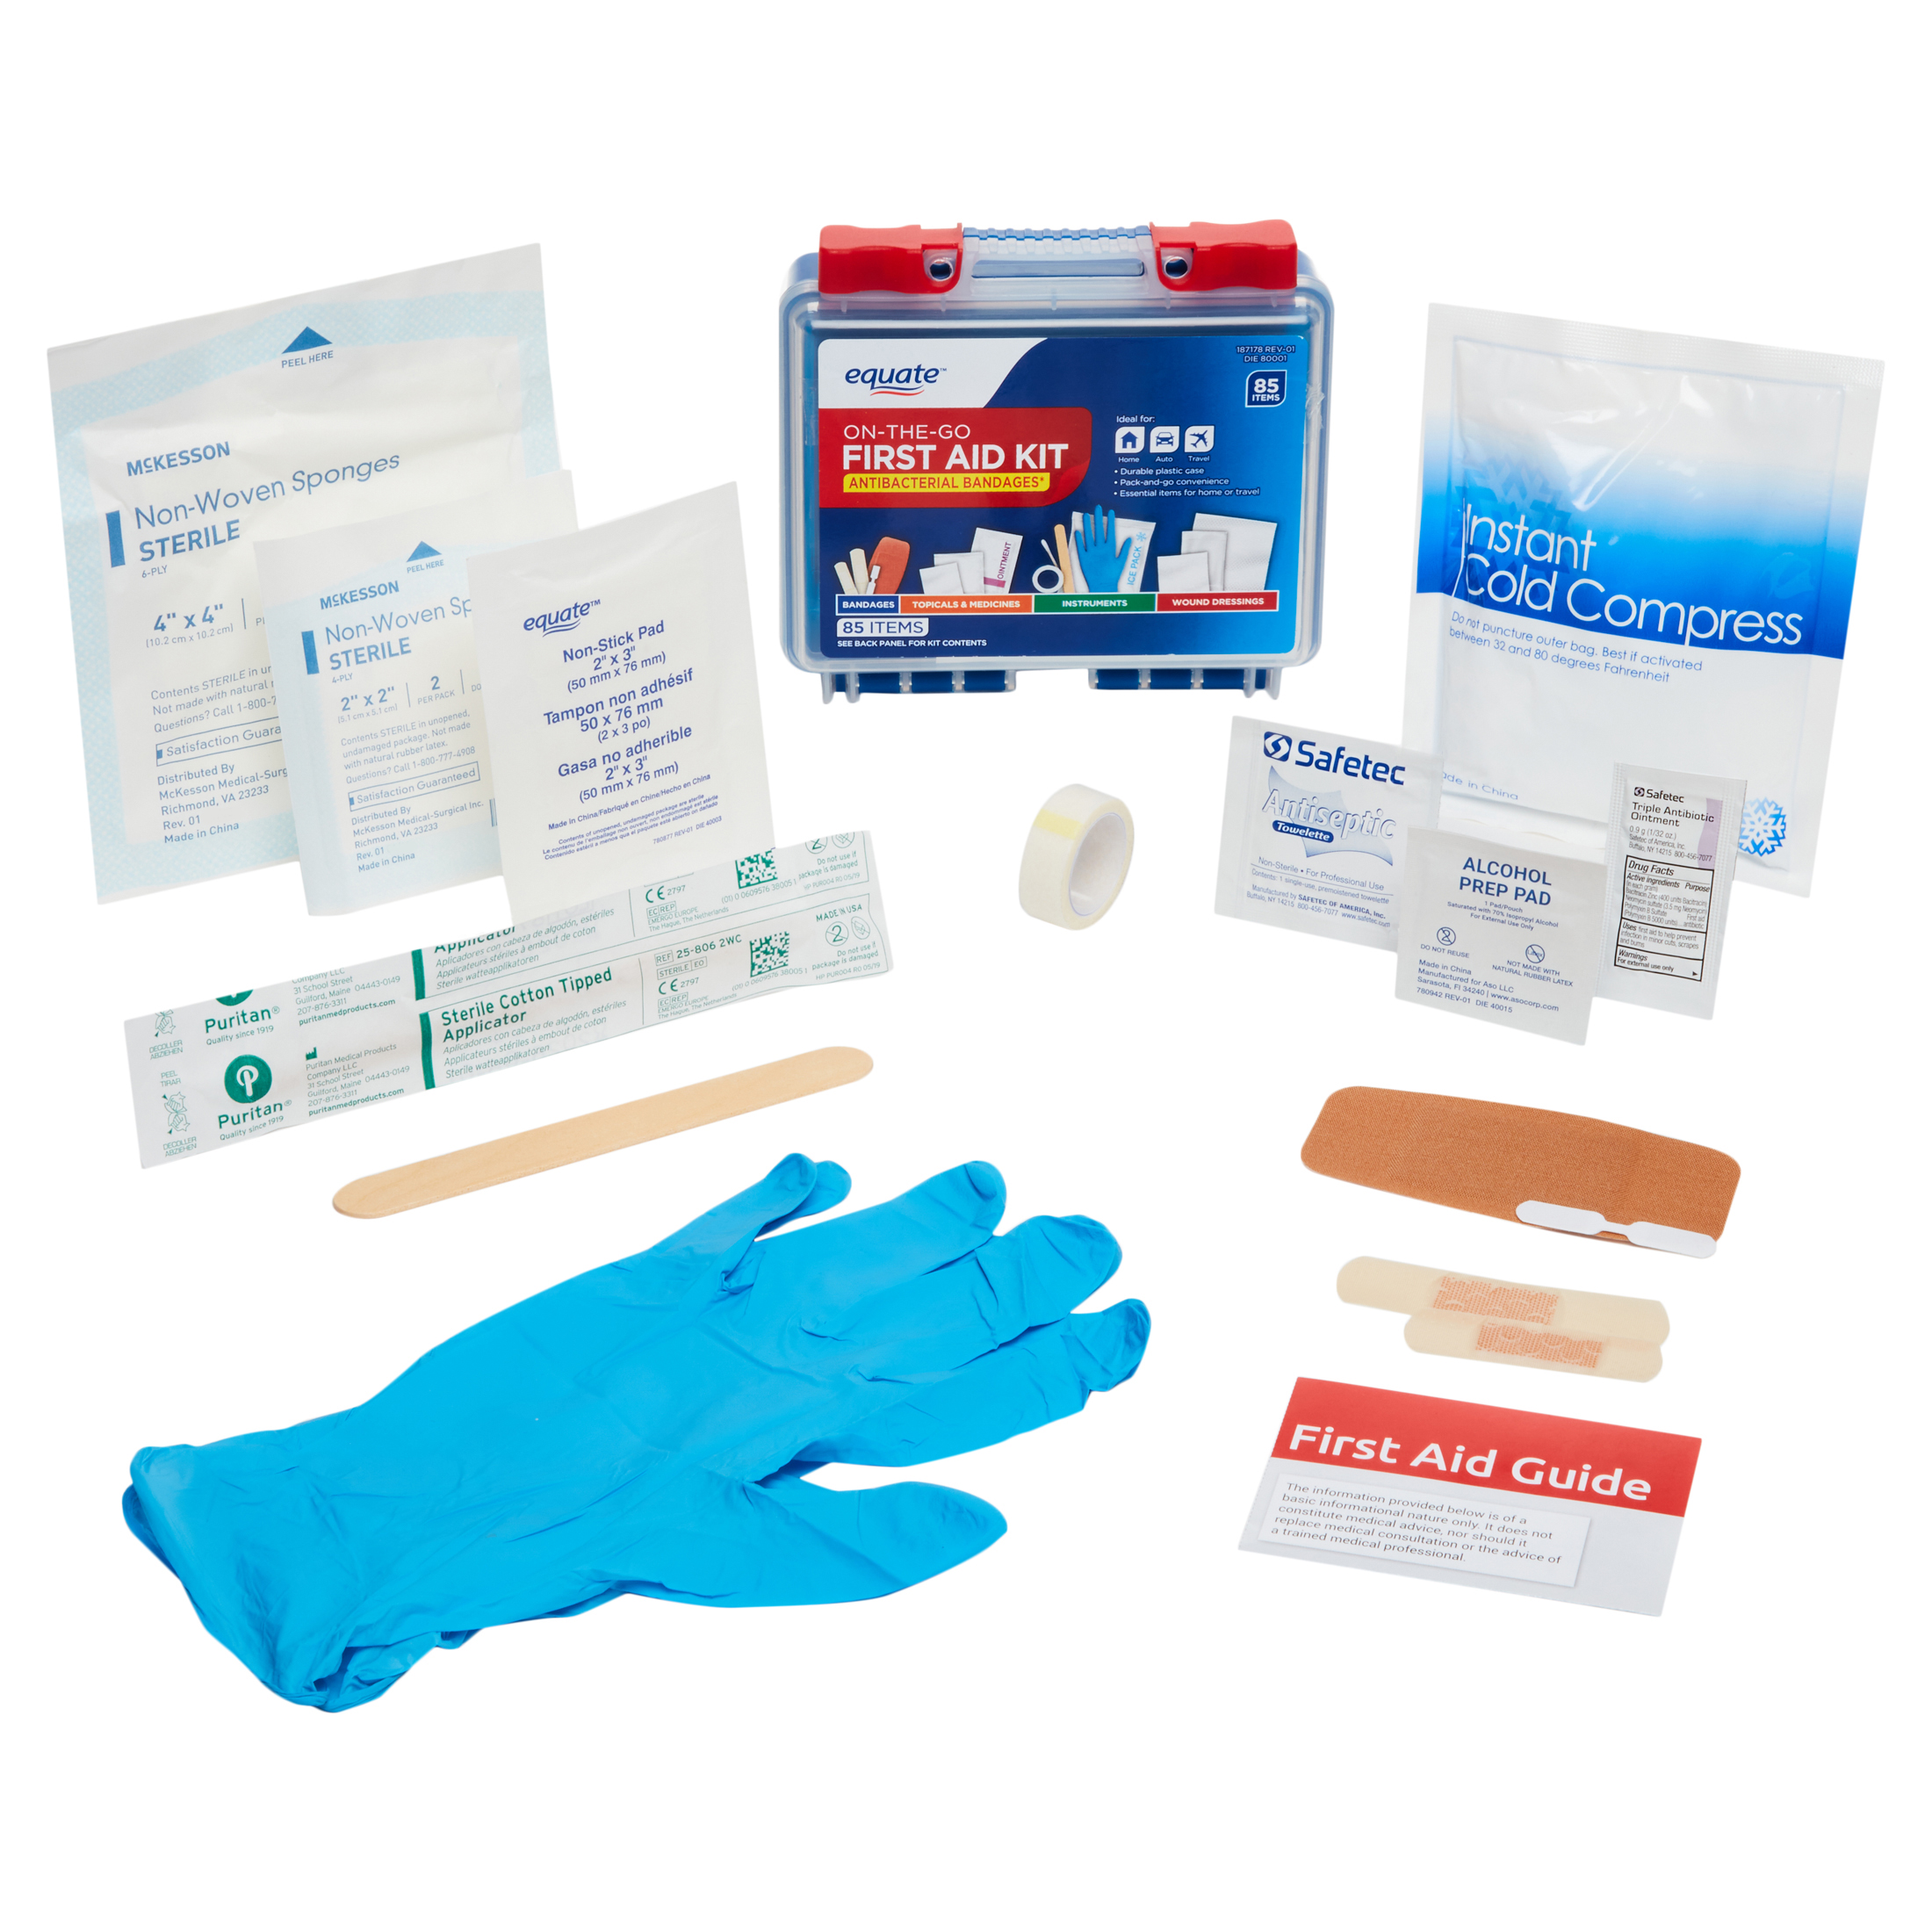 Equate On-The-Go First Aid Kit, 85 Items - image 6 of 9